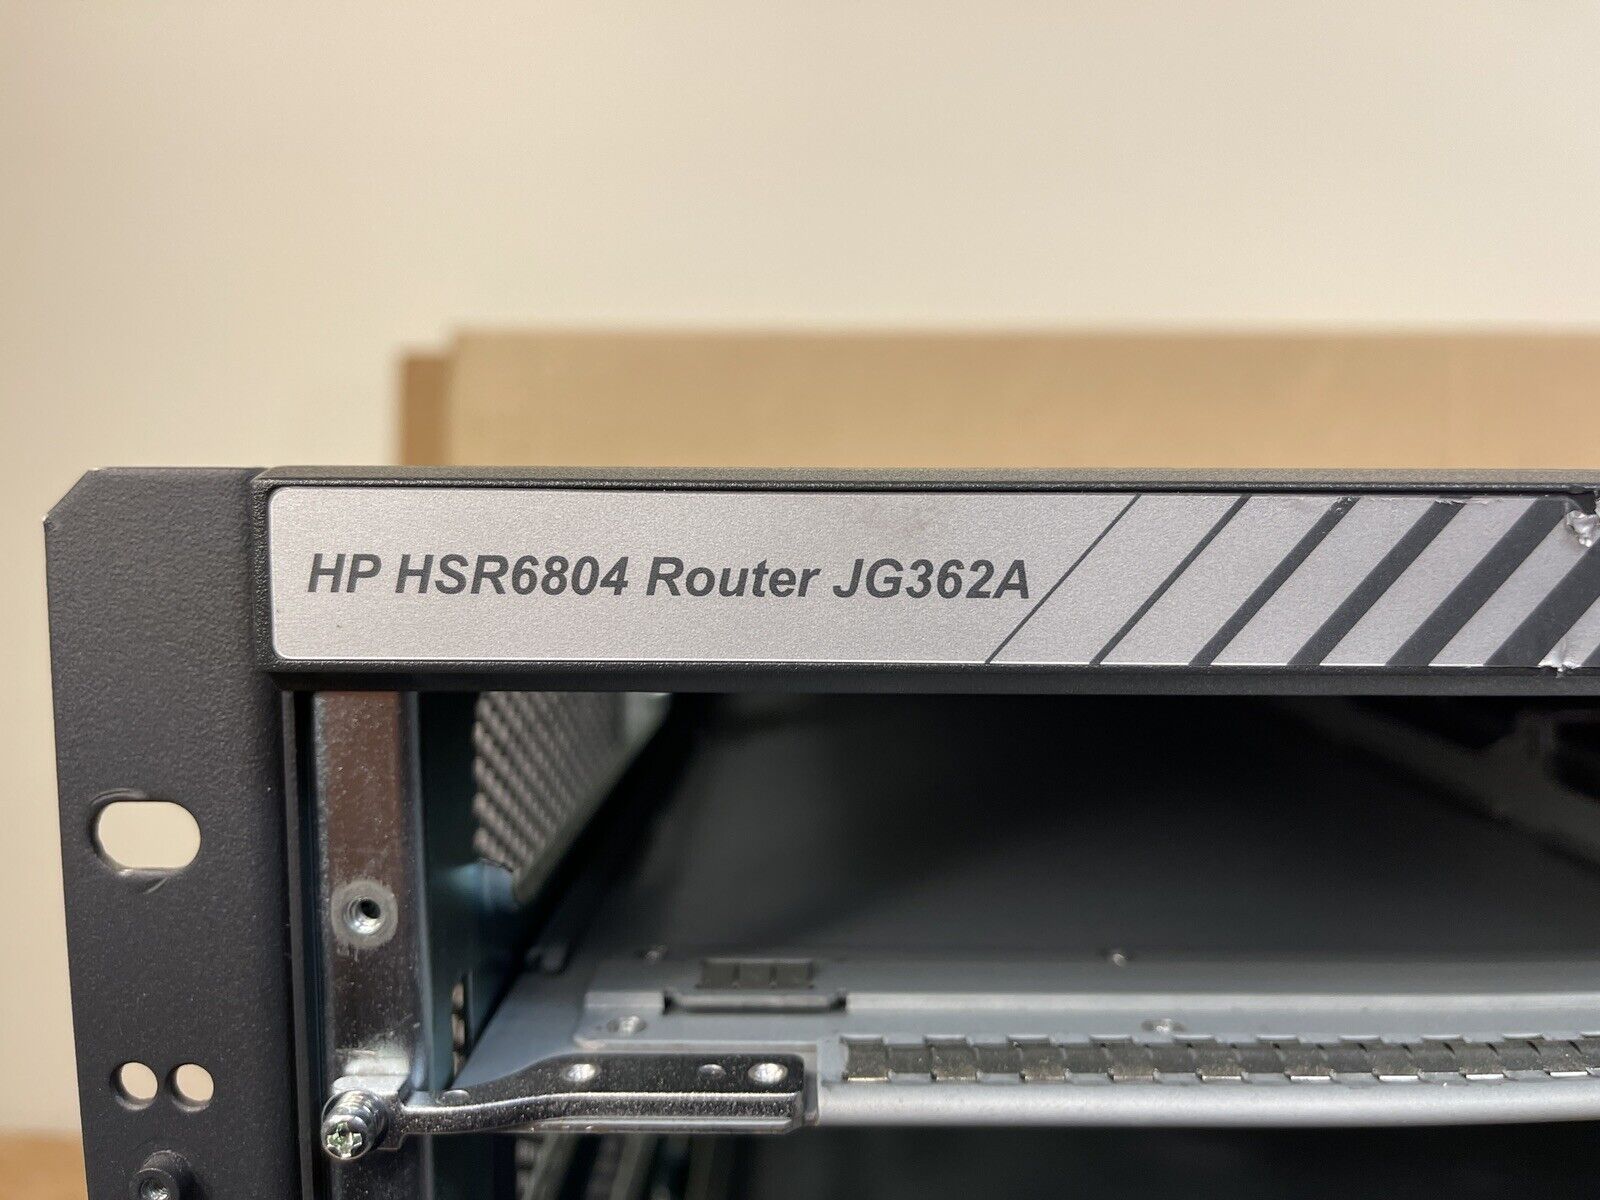 HP JG362A FlexNetwork HSR6804 RSE-X2 Router Chassis with Fan Module.